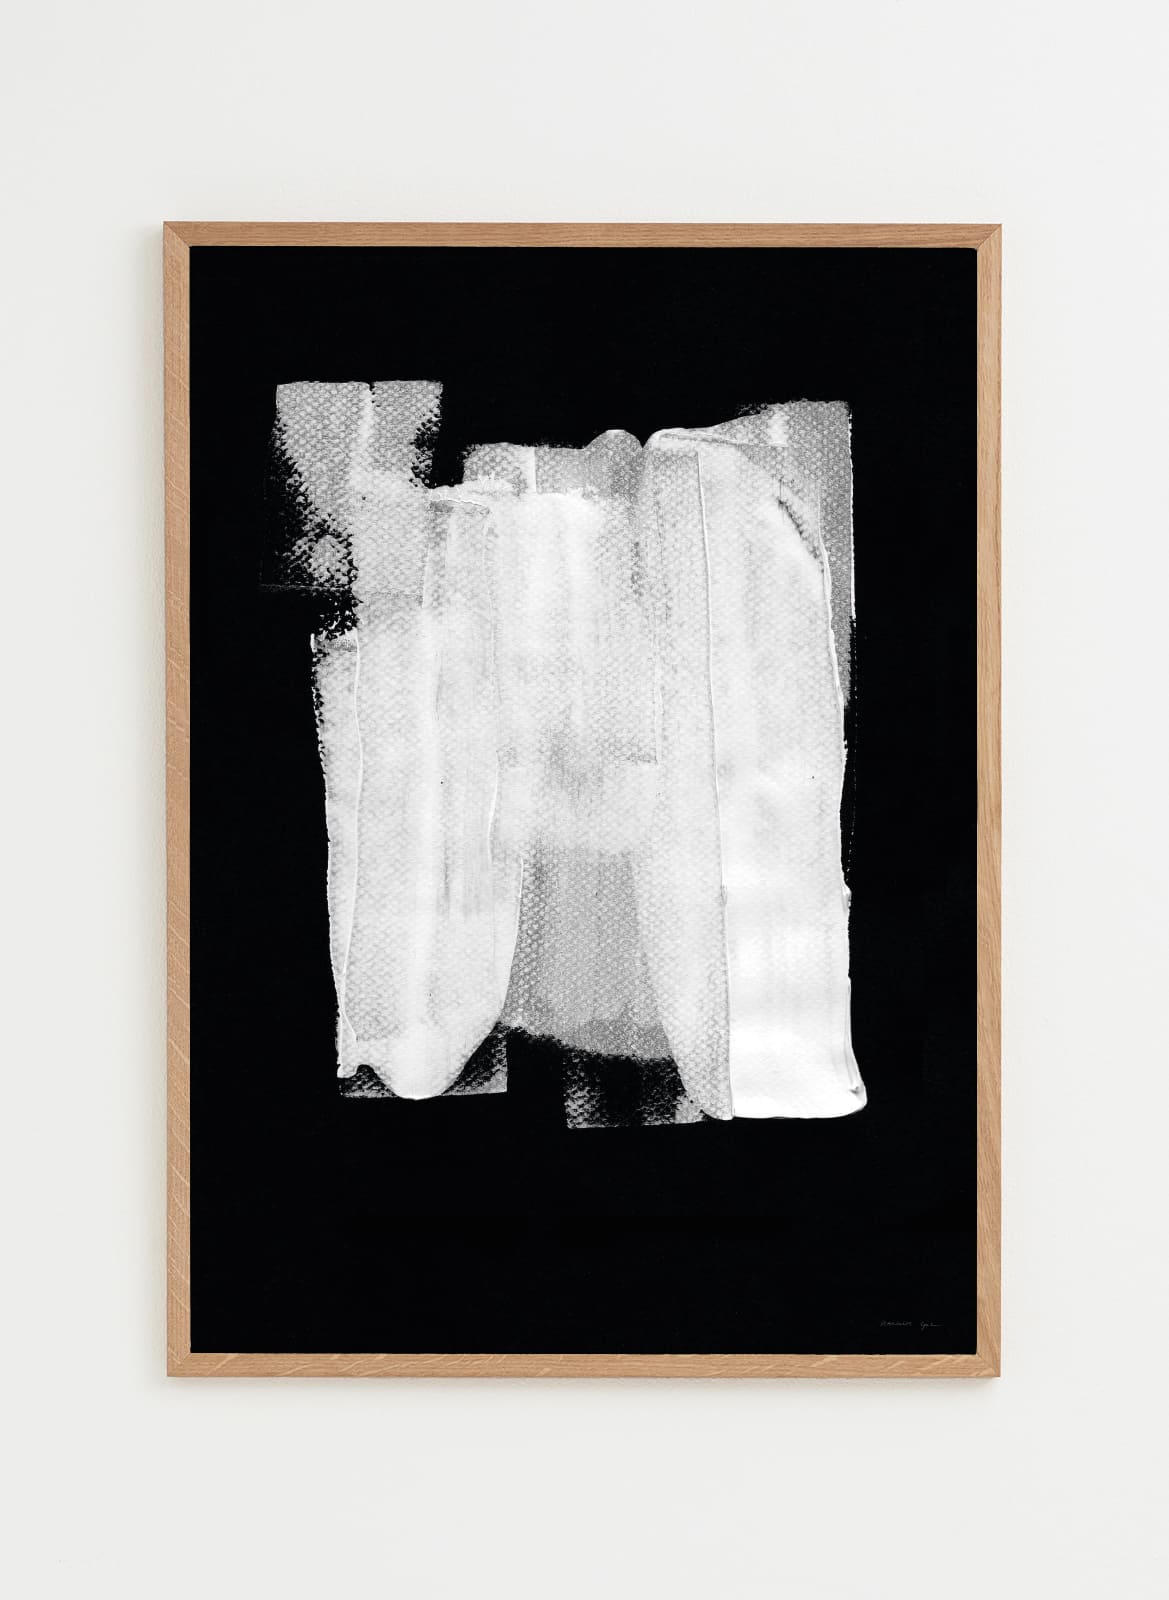 Black and white poster made by atelier cph